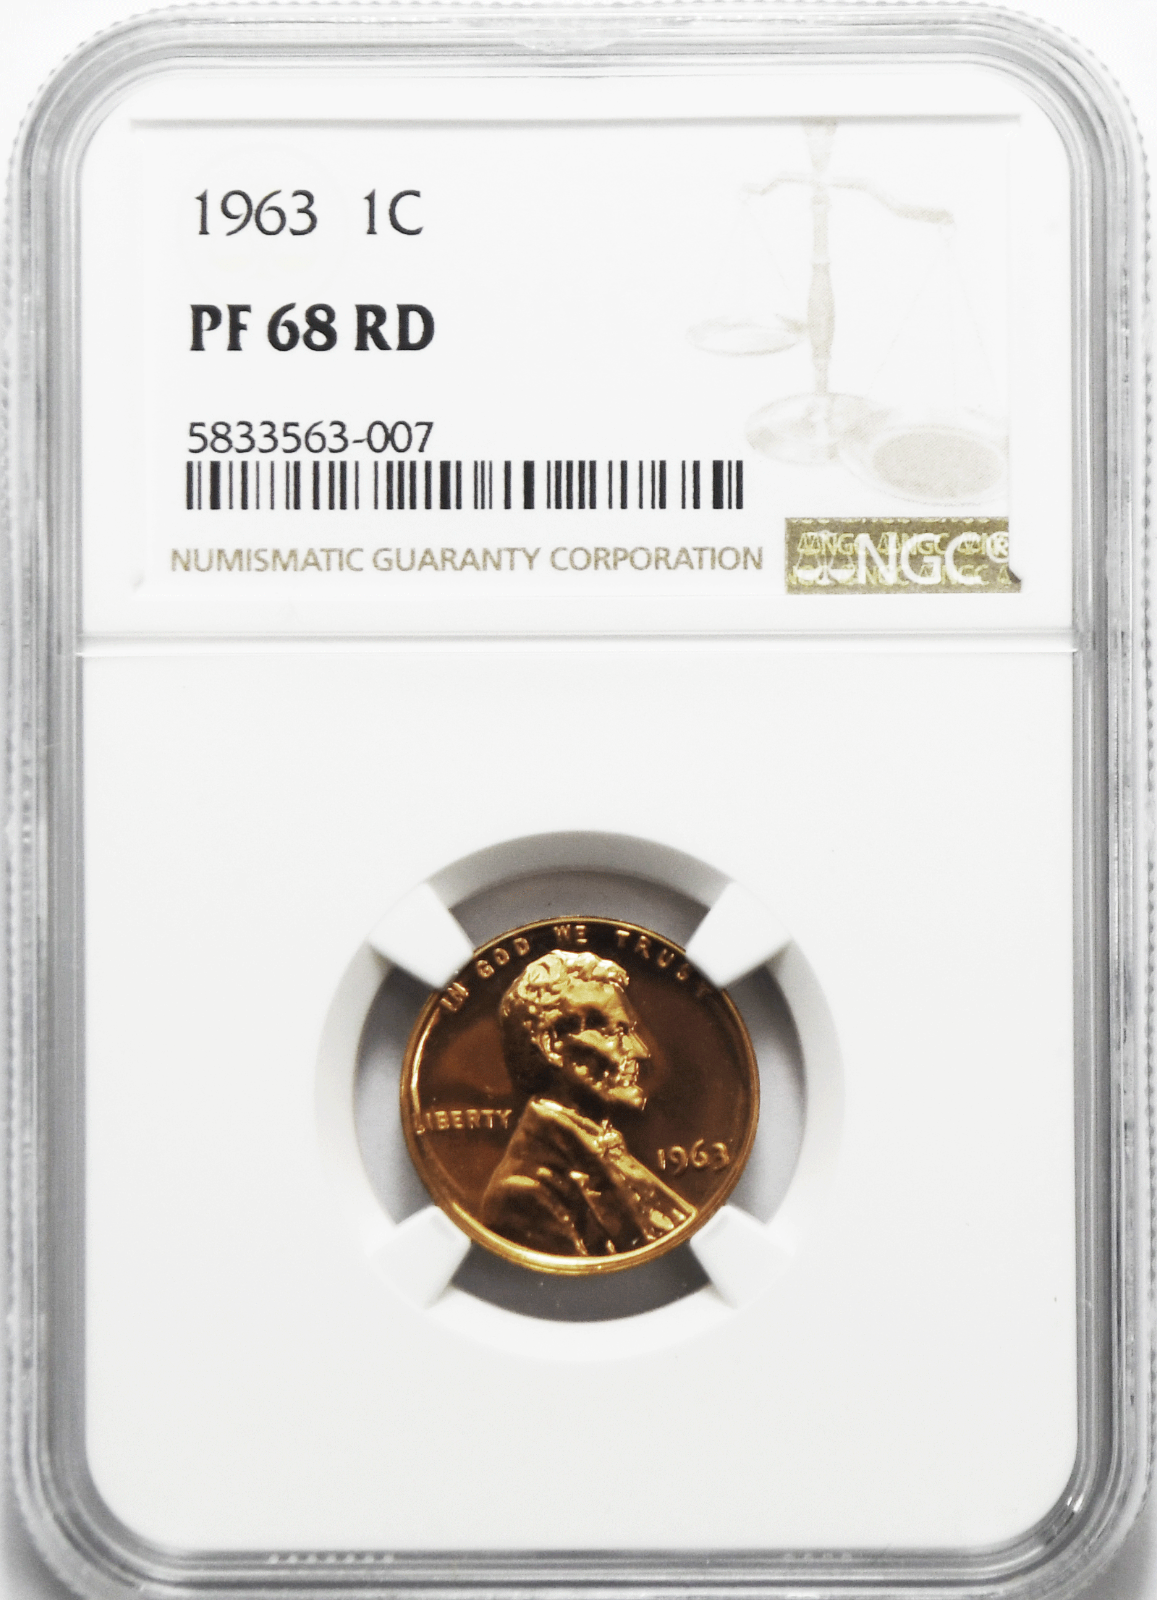 1963 1c Proof Lincoln Memorial Cent One Penny NGC PF68 RD Gem Uncirculated